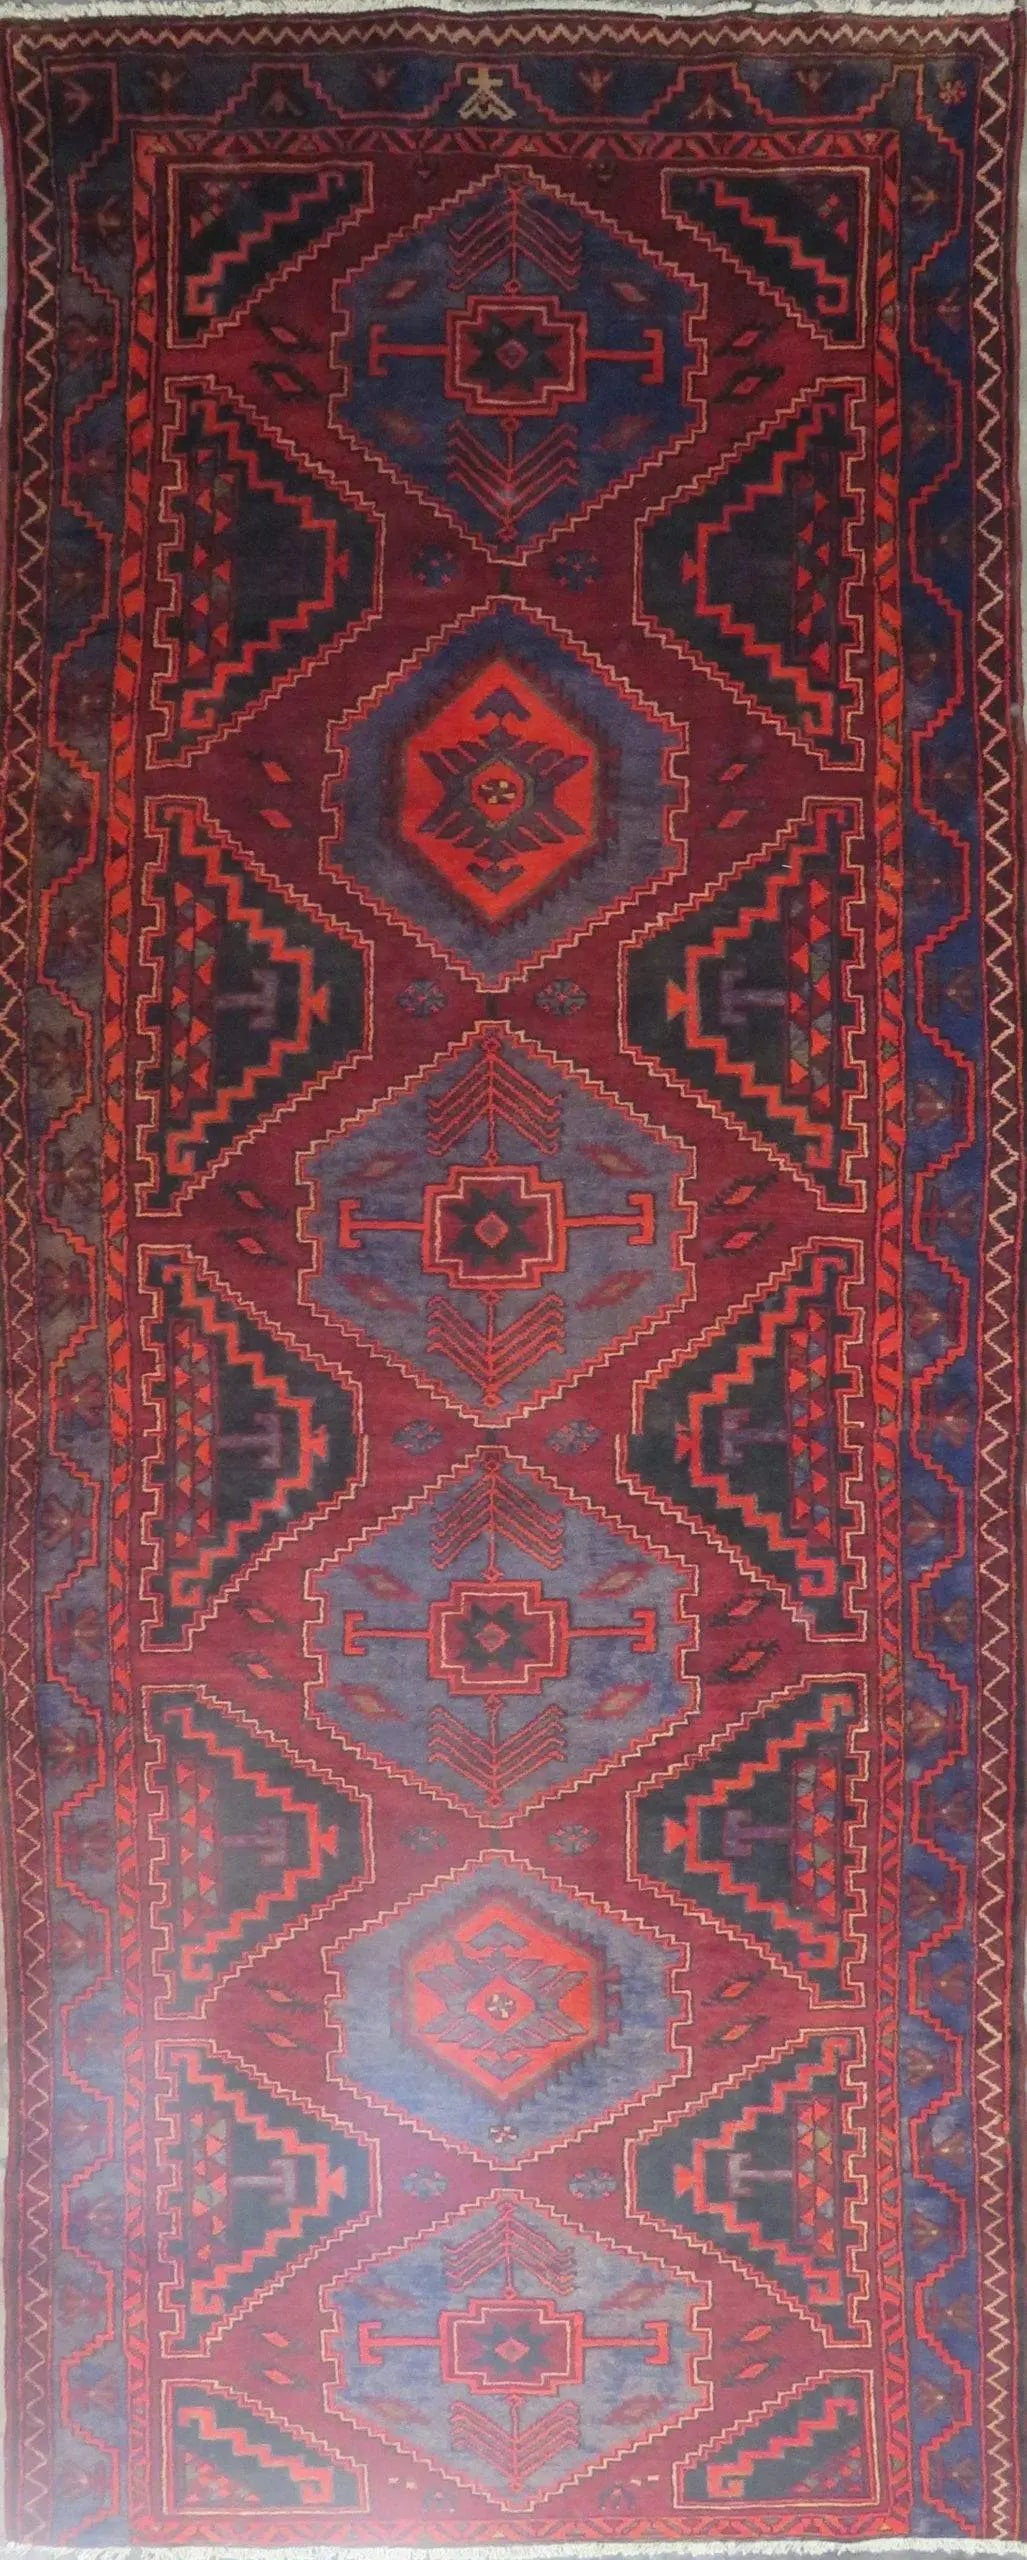 Hand-Knotted Persian Wool Rug _ Luxurious Vintage Design, 12'6" x 4'8", Artisan Crafted